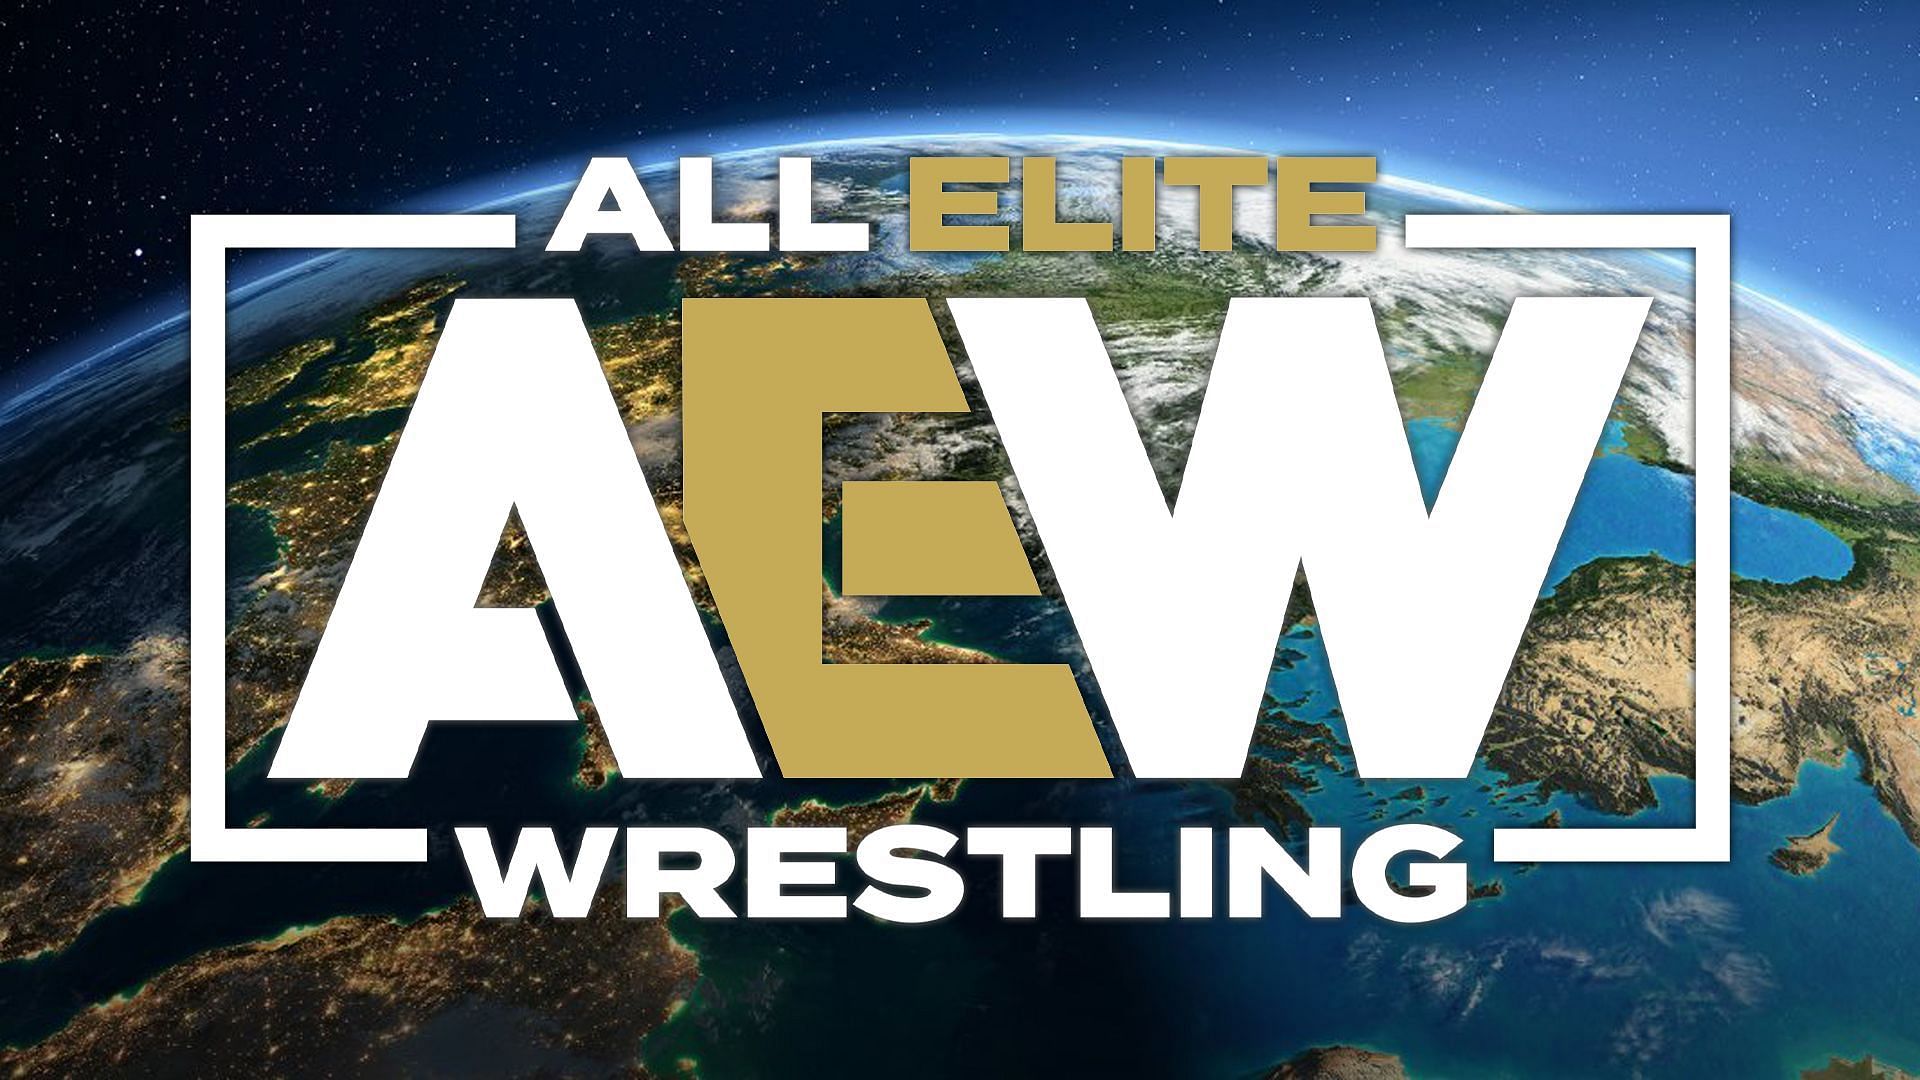 AEW stars are often able to challenge opponents outside the company